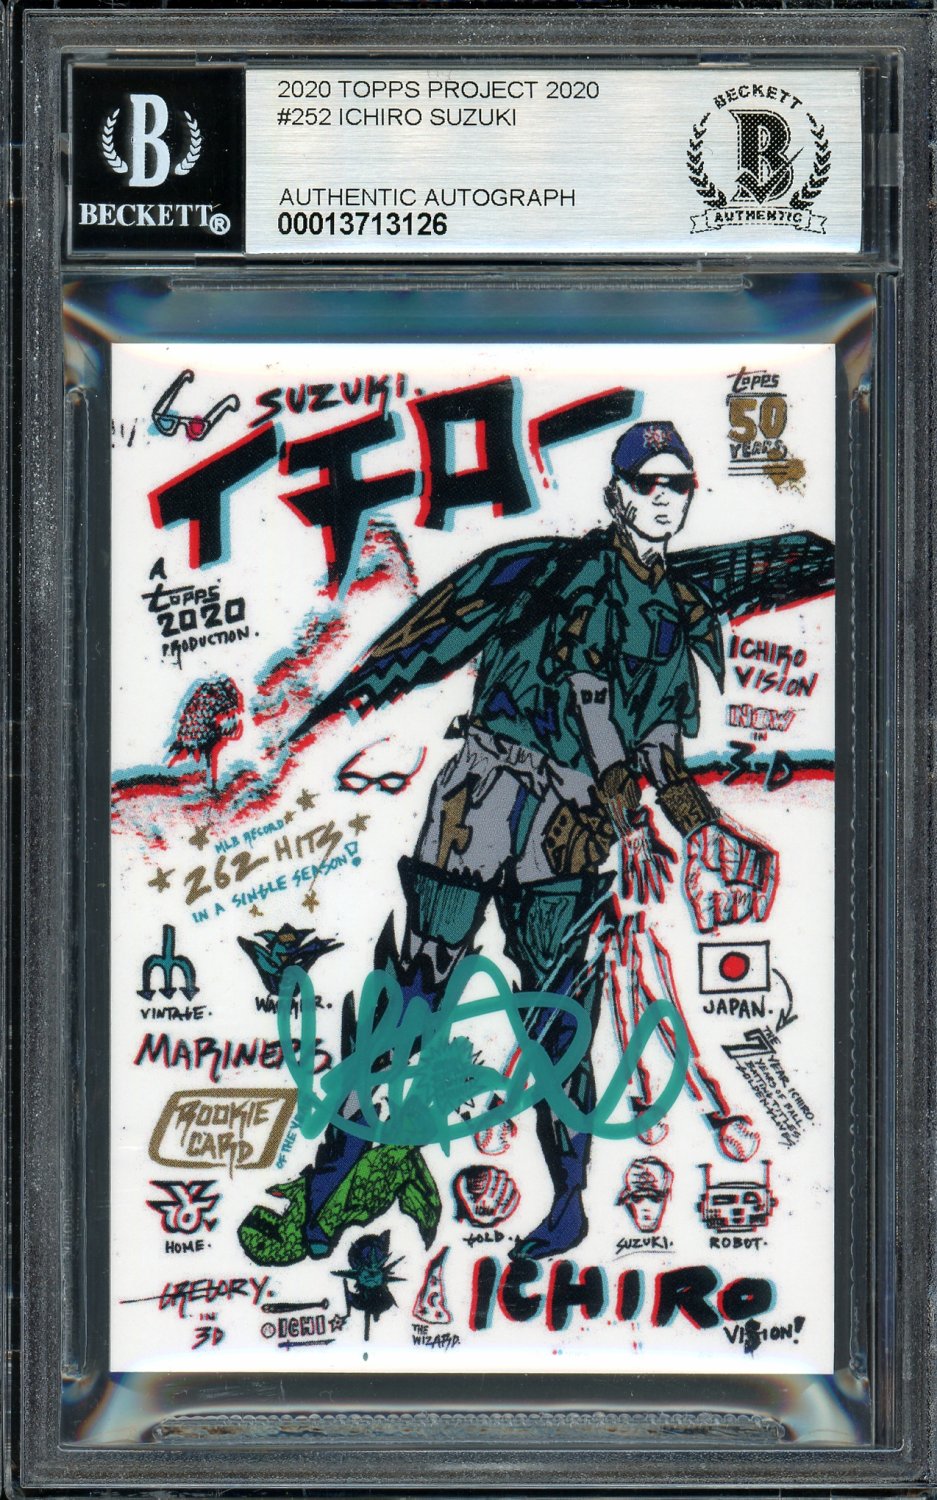 Ichiro Suzuki Autographed Signed Topps Project 2020 Gregory Siff